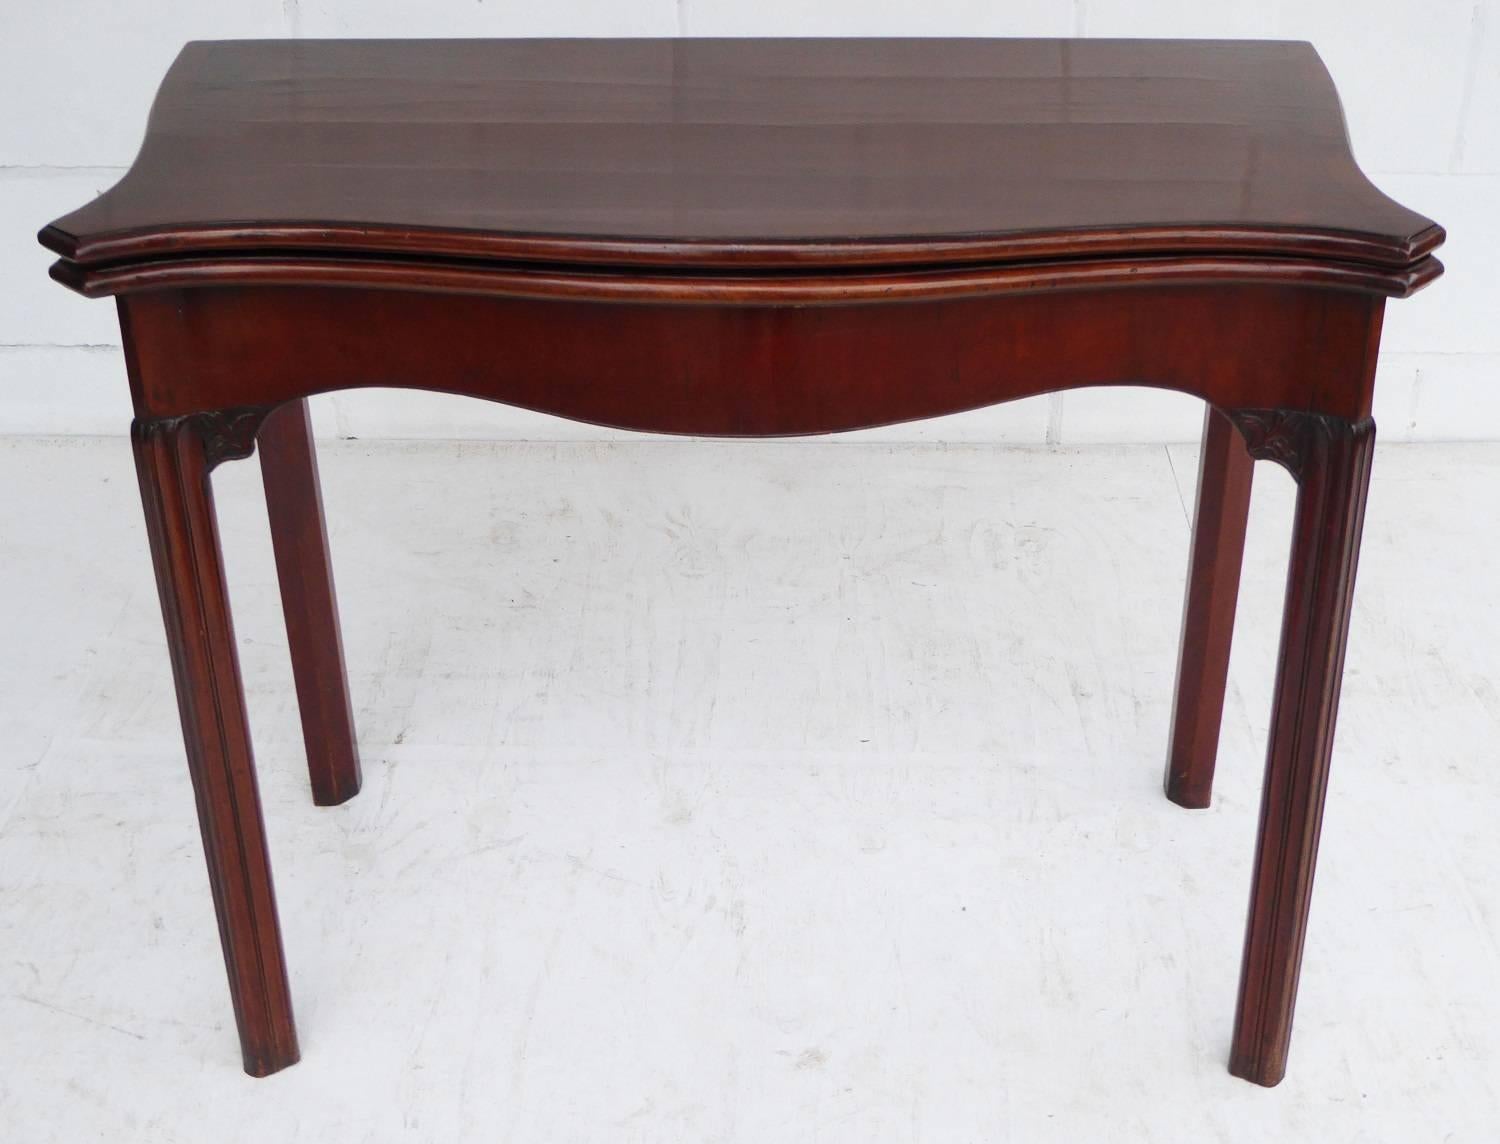 For sale is a good quality early George III mahogany serpentine cad table. The top of the table folds over to reveal a shaped green baise, above four square legs, with small fretwork brackets. This piece is in good condition for its age, with minor